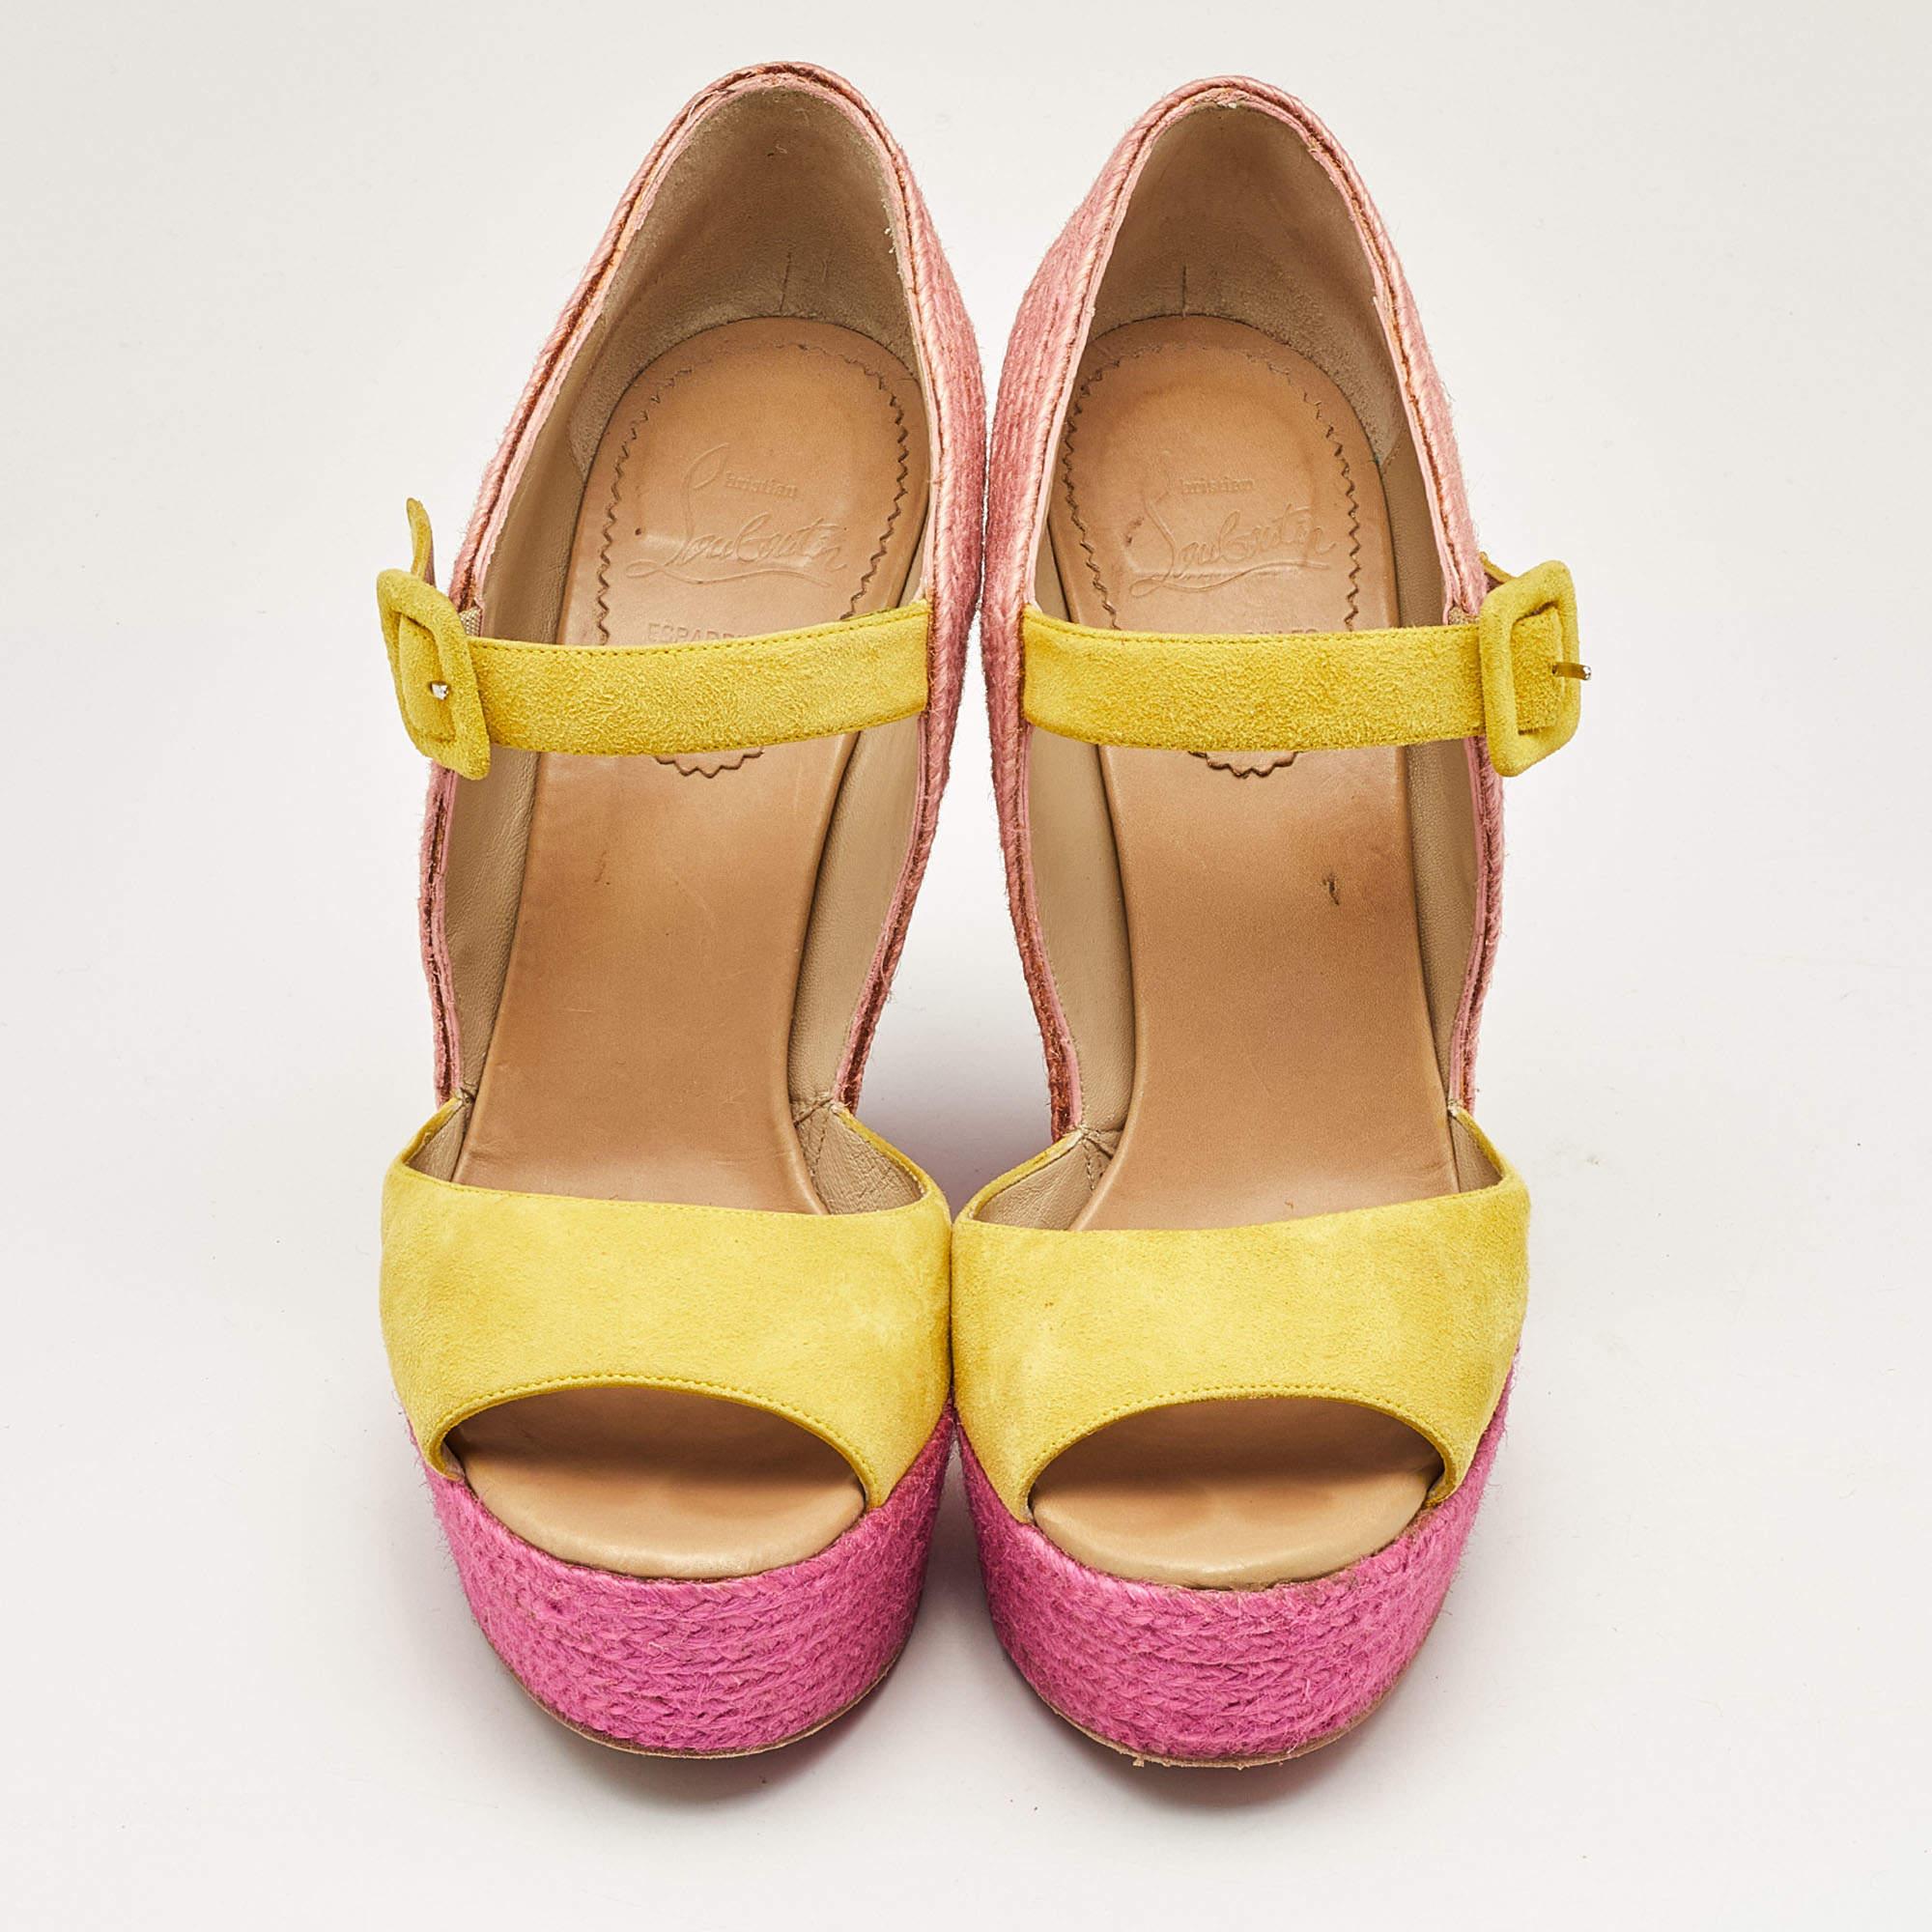 Christian Louboutin Yellow/Pink Suede Praia Wedge Sandals Size 40 In Good Condition For Sale In Dubai, Al Qouz 2